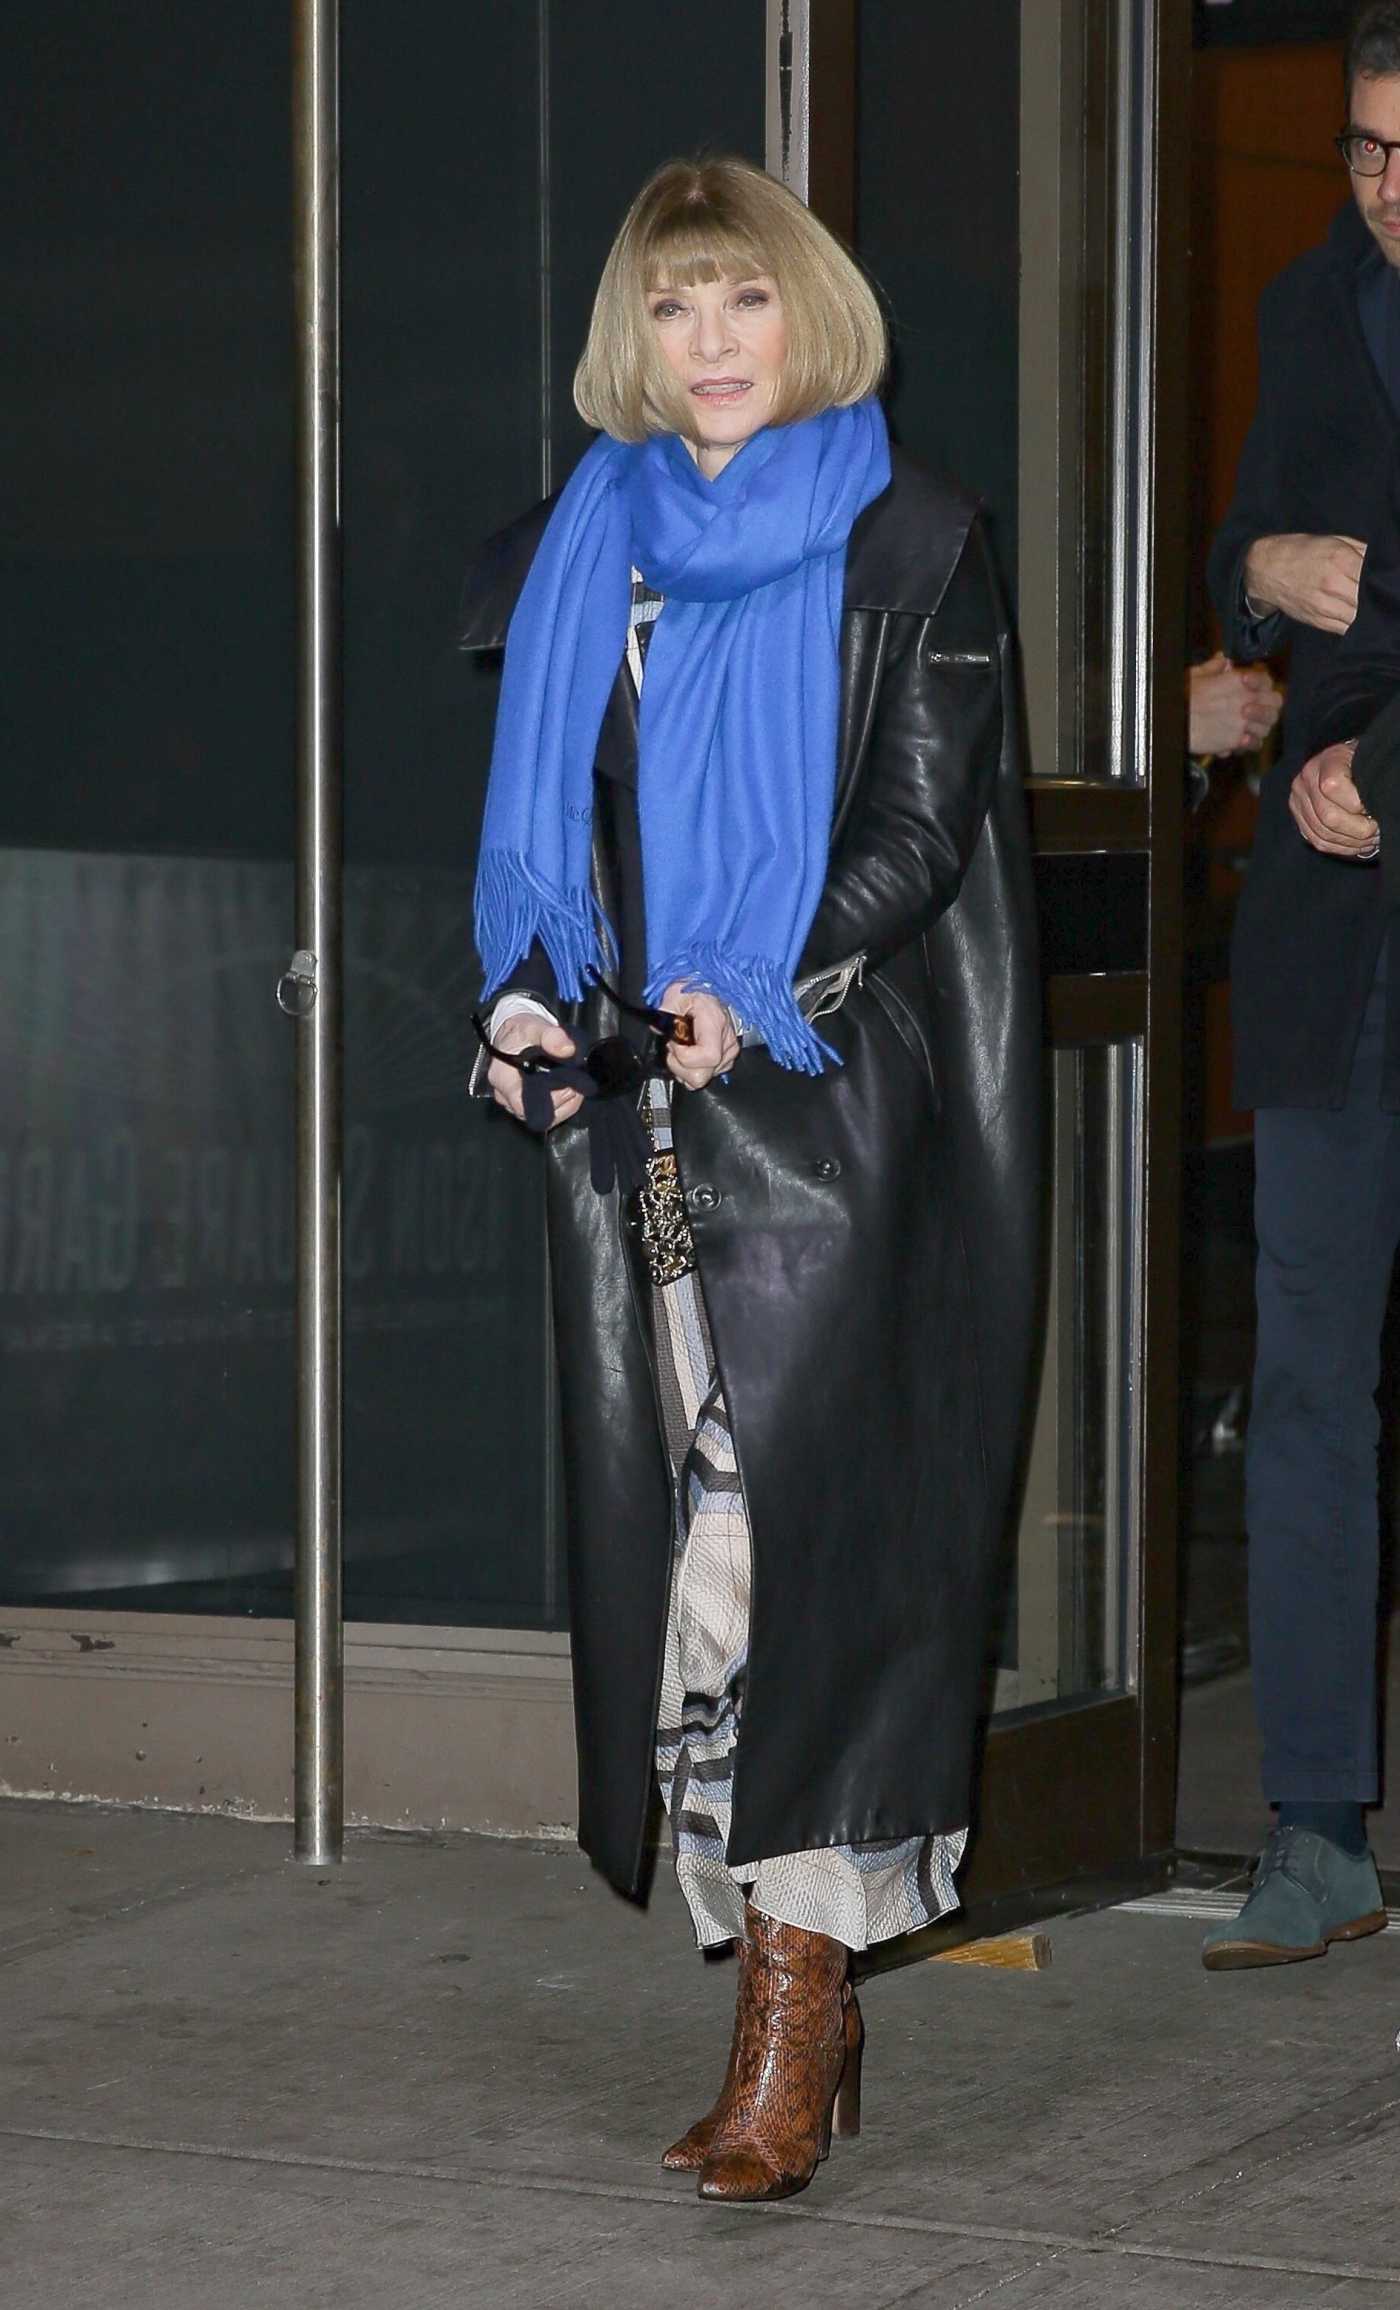 Anna Wintour in a Black Leather Coat Leaves Madison Square Garden in New York City 01/31/2023